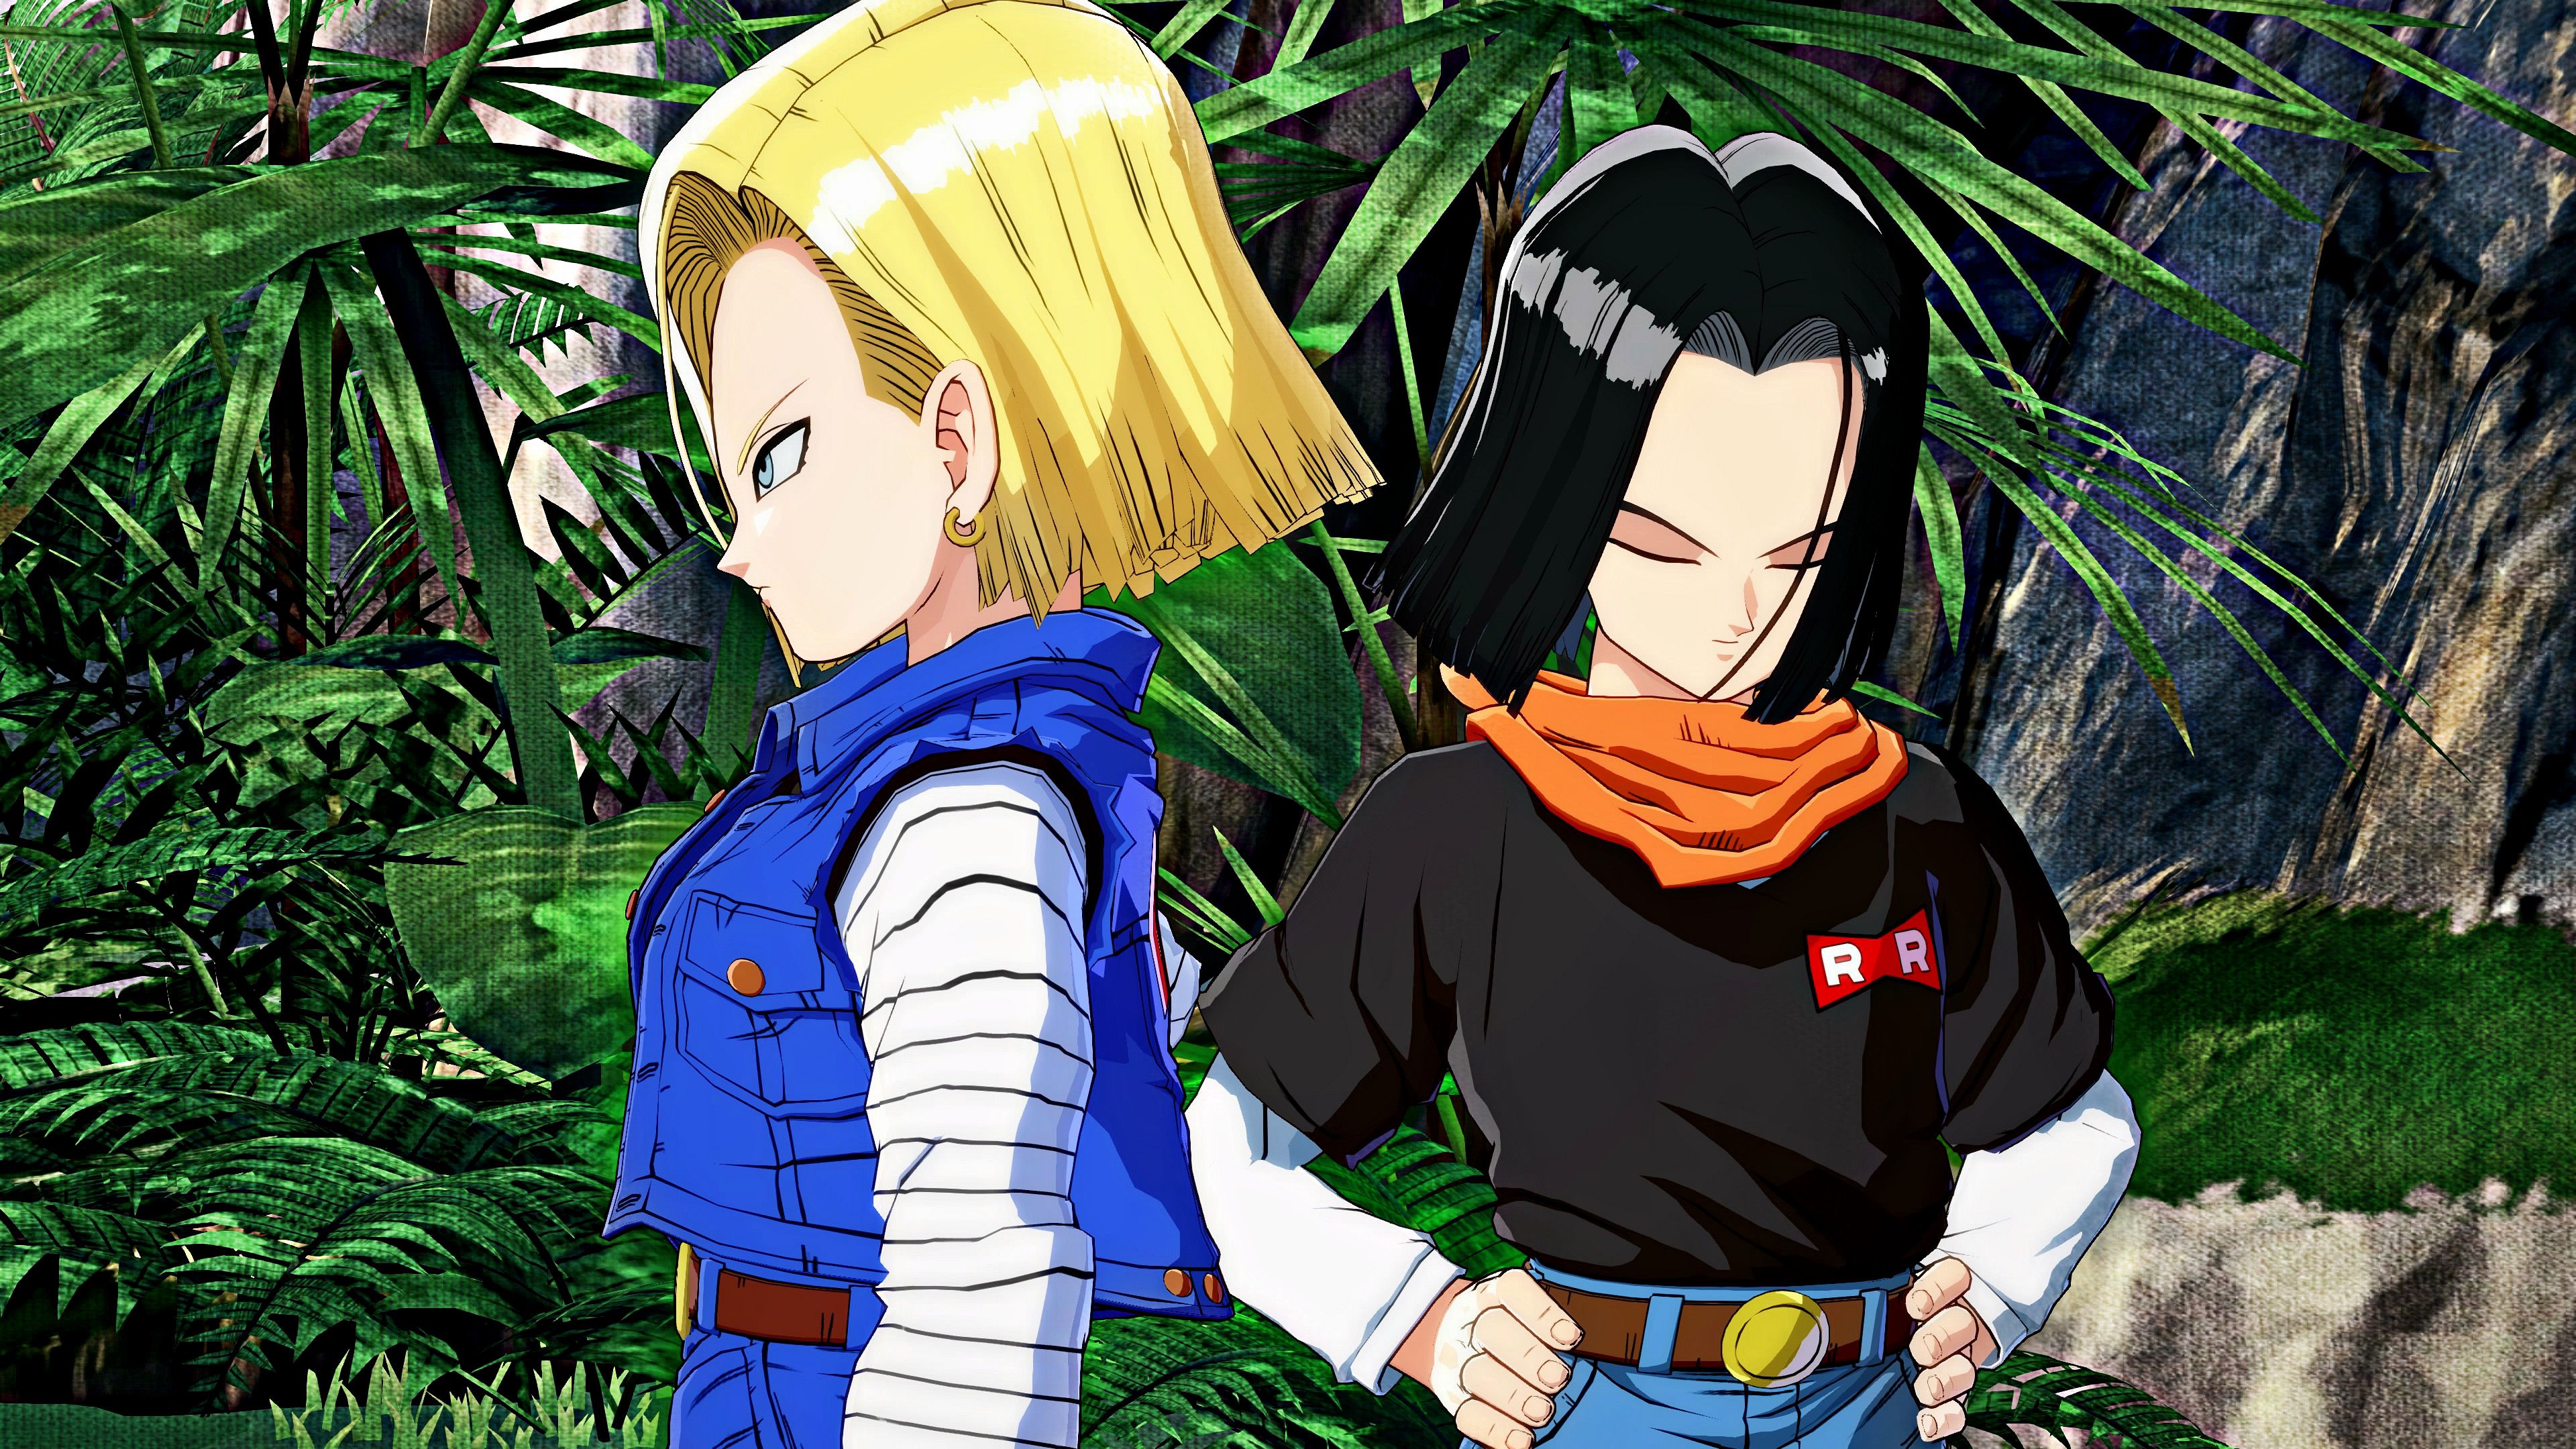 Android 18 naked wallpaper